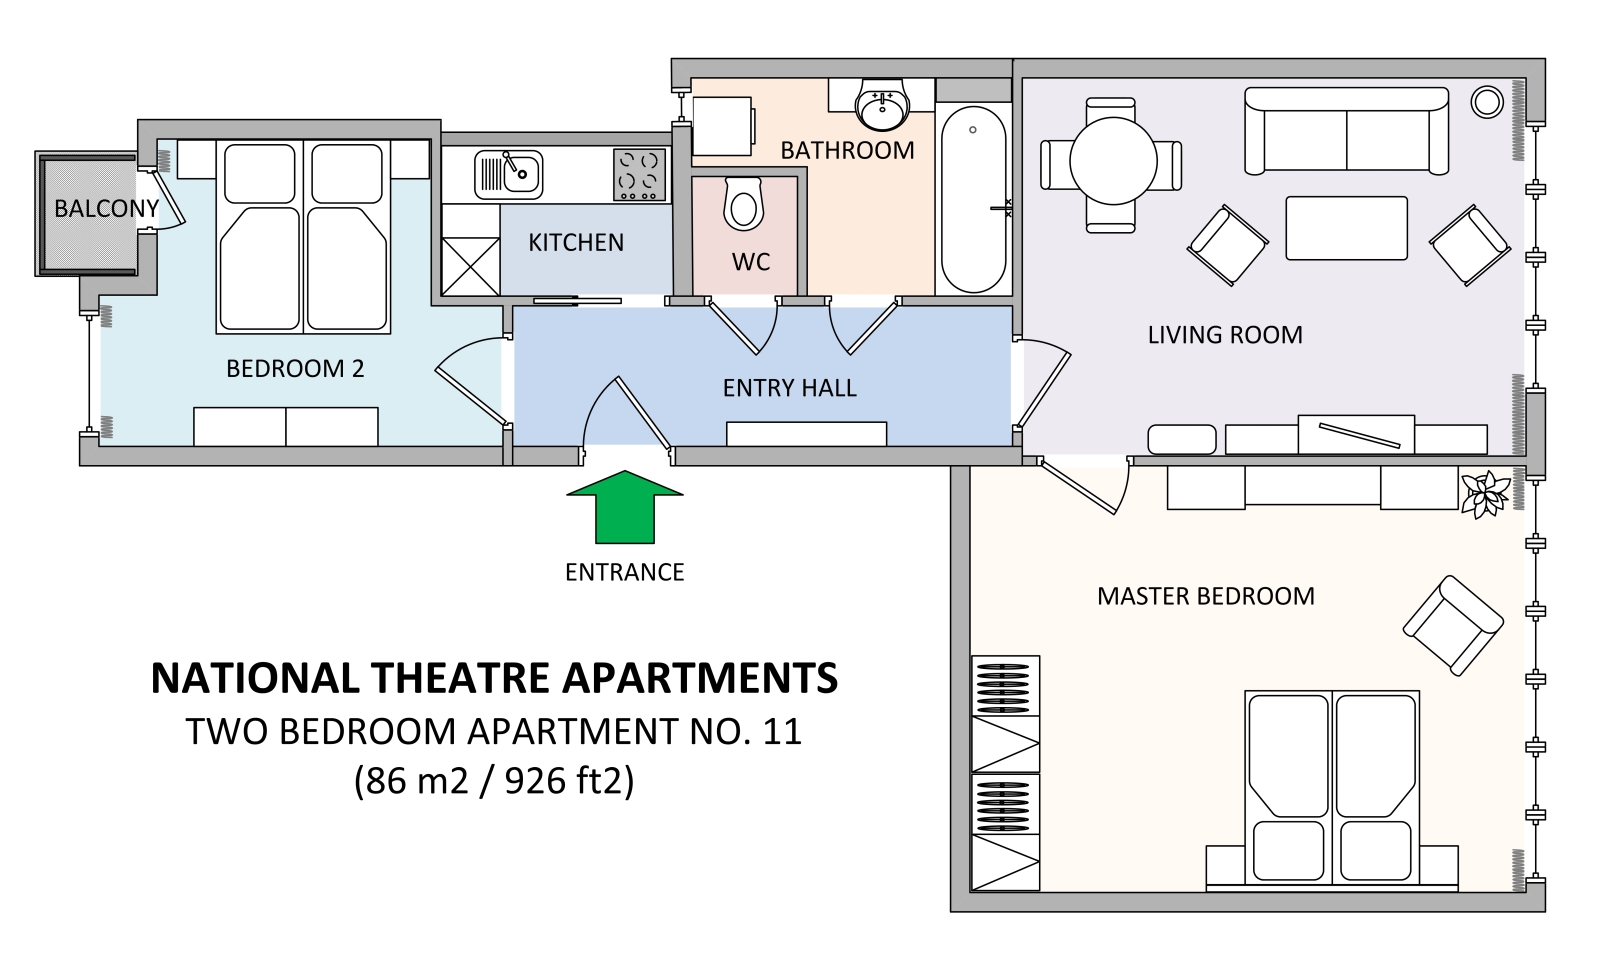 Floorplan of apartment 11 in National Theatre Apartments residence in Prague